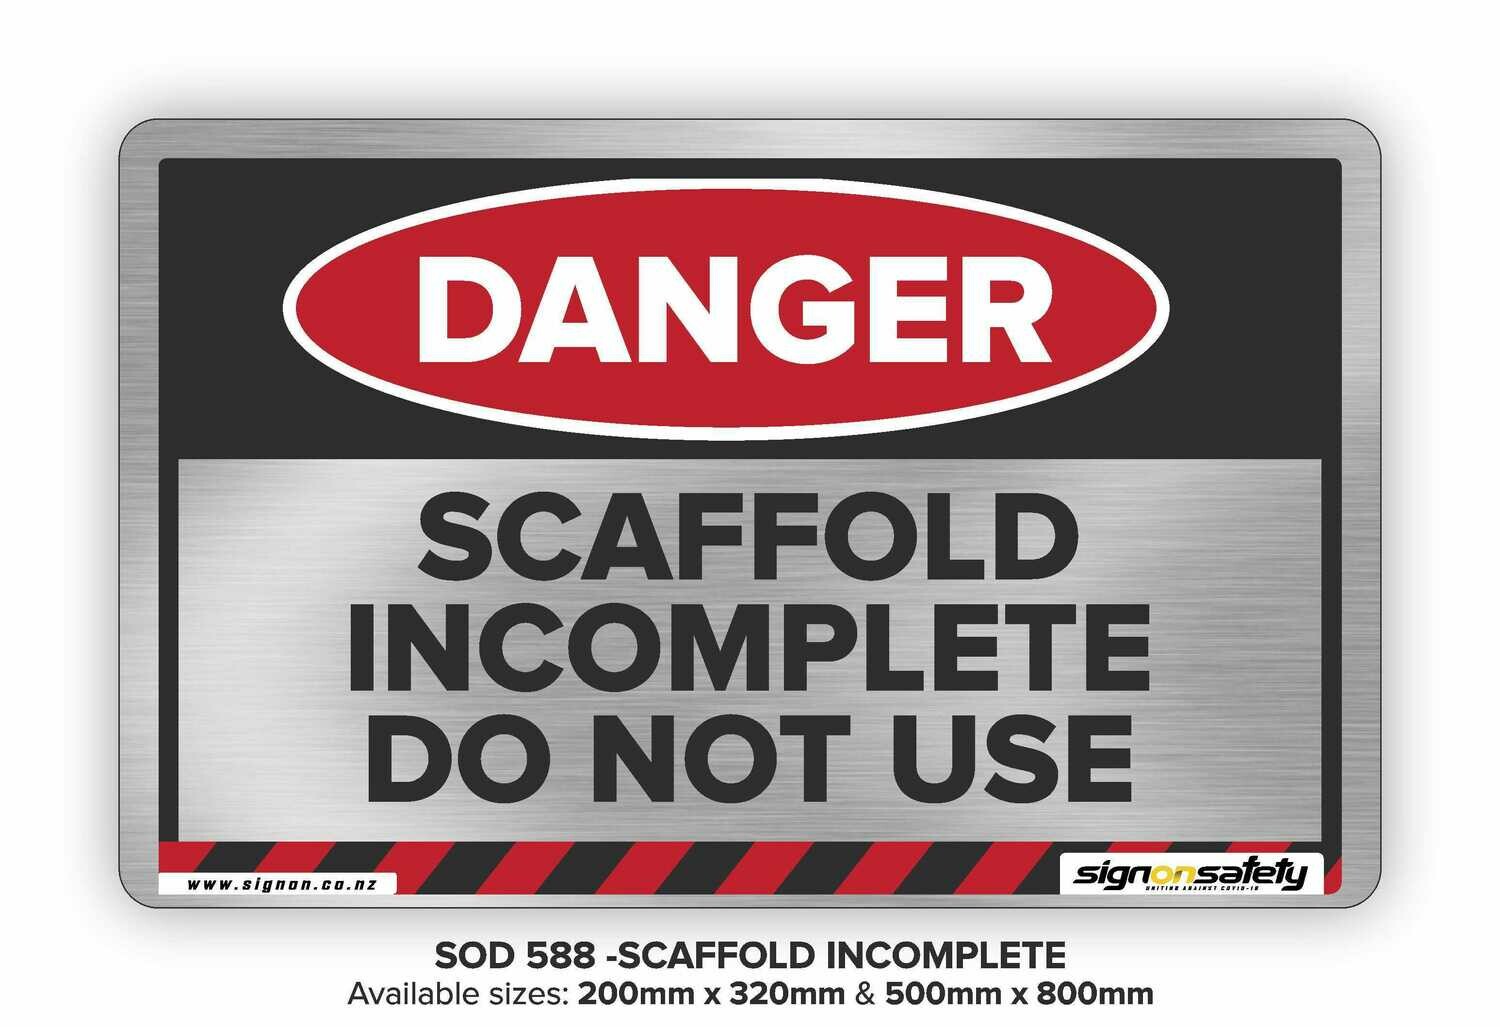 Danger - Scaffold Incomplete Do Not Use